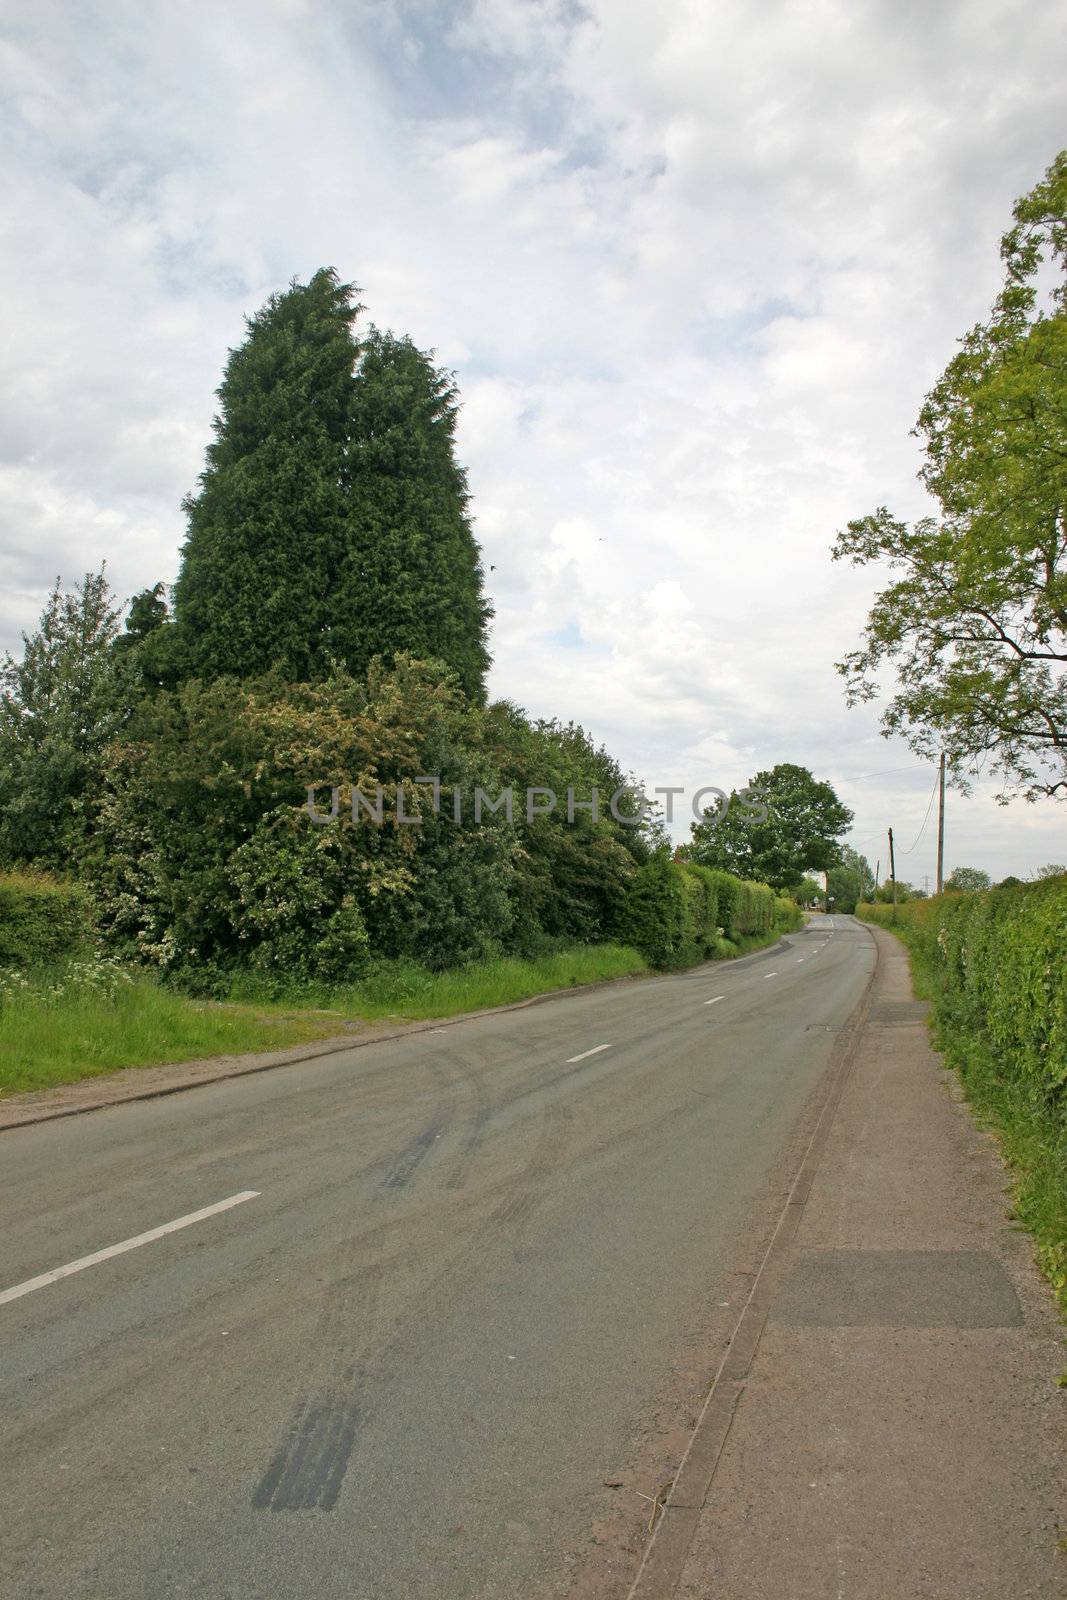 English Country Lane with Tyre Marks